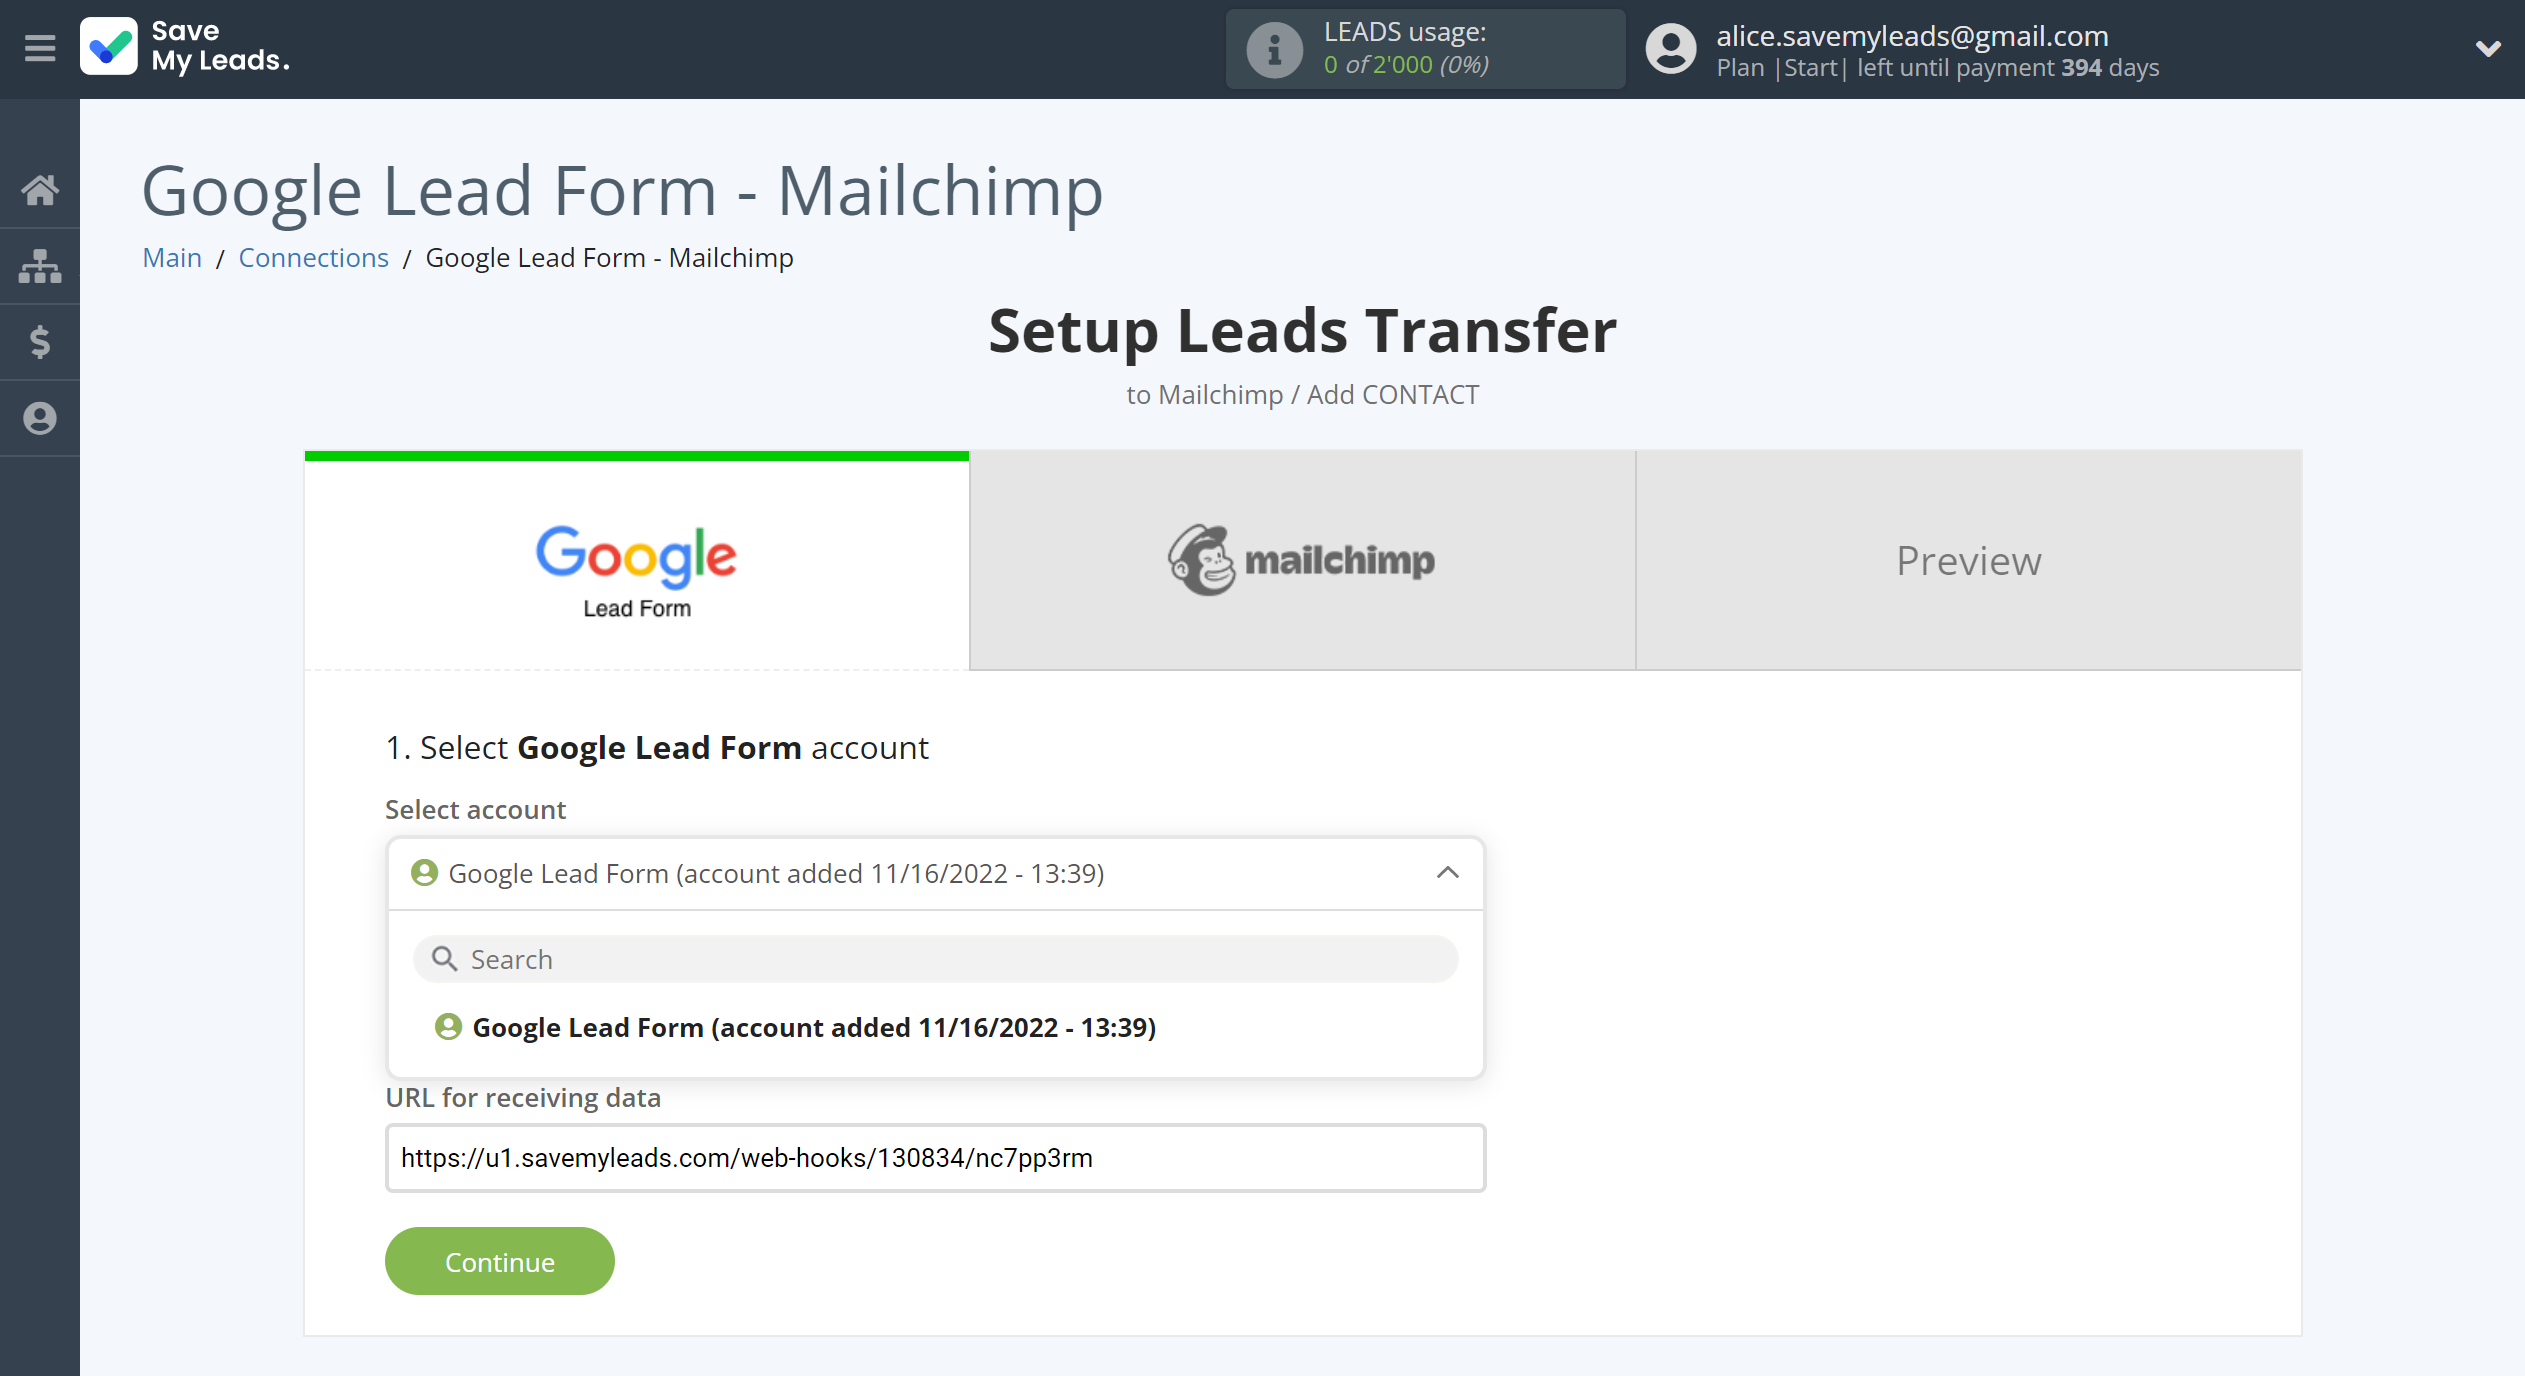 How to Connect Google Lead Form with MailChimp | Data Source account selection